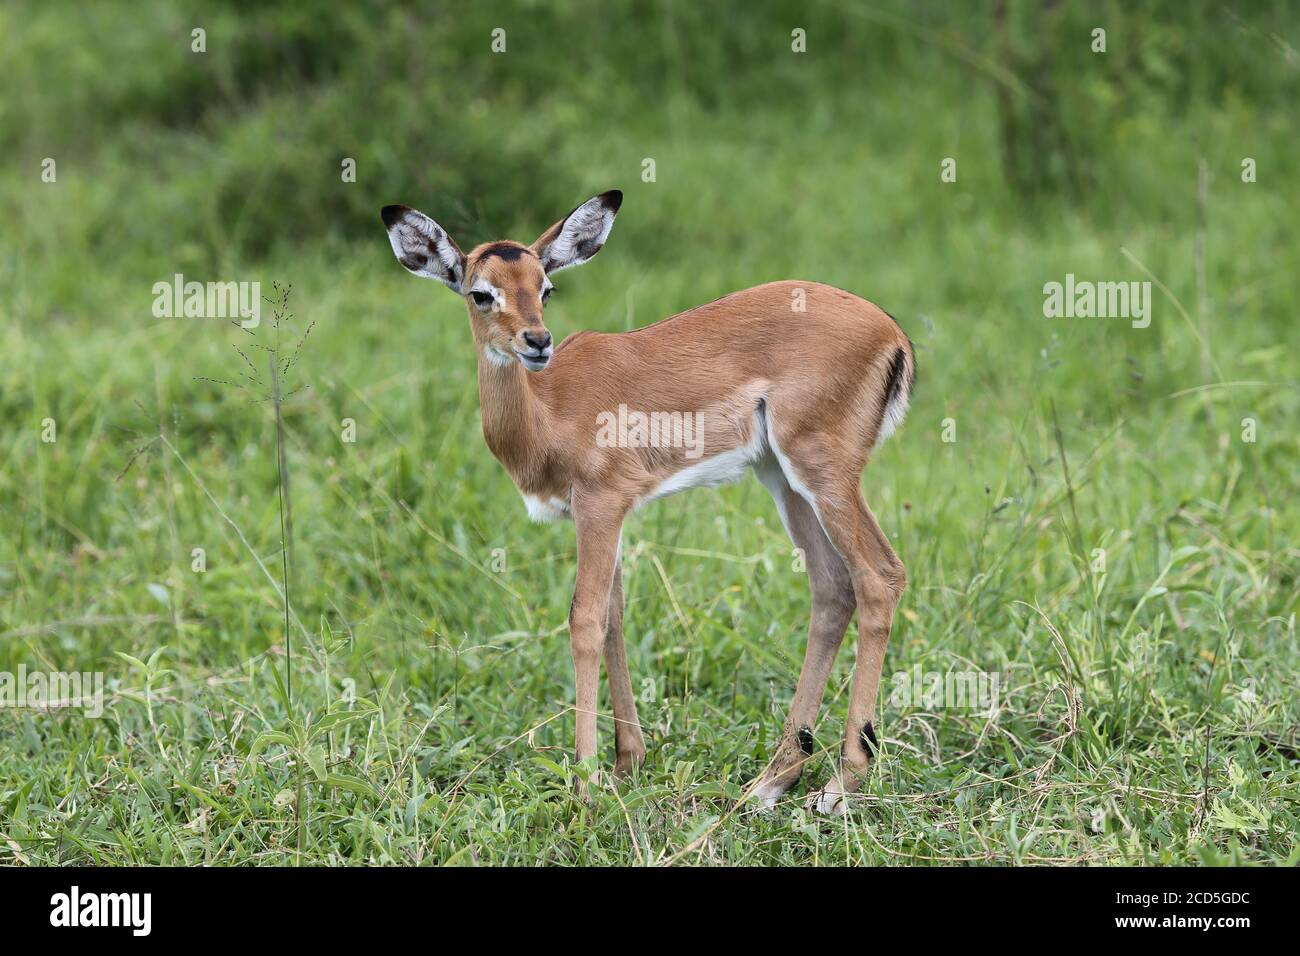 Young Impala standing alone in savannah grass Stock Photo